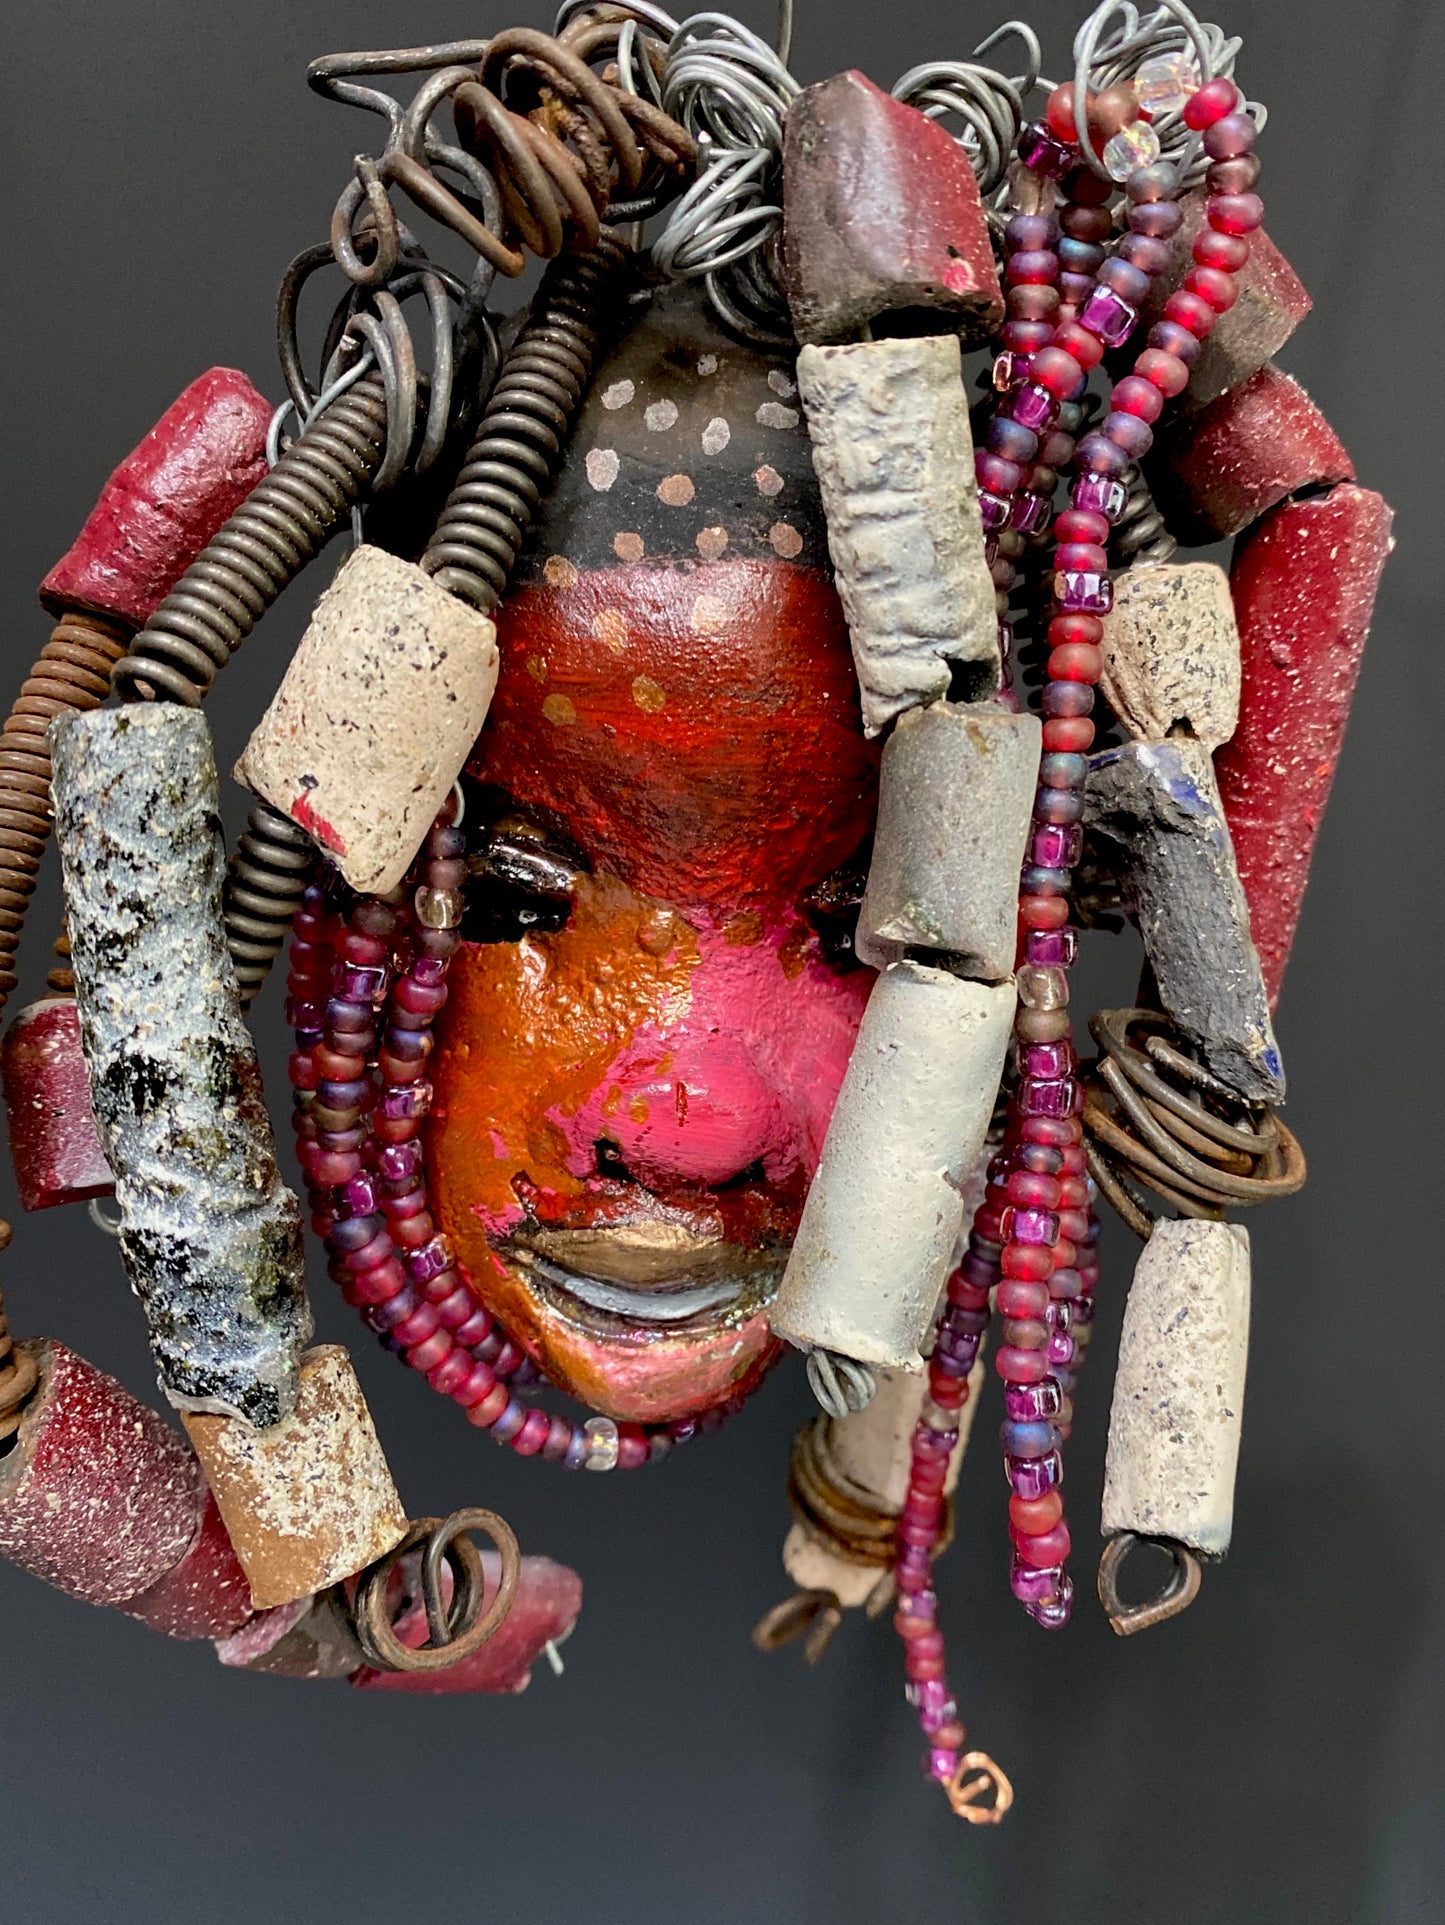 I started making mask soon after seeing authentic African artwork at the Smithsonian Museum of African Art. I was in total awe. I was inspired by my visit there..  Kylie has a multi colored red tone  metallic copper complexion. She is 7" x 5" and weighs 8 ozs. Kylie has  over 50 mini beads and handmade raku beads. Kylie has over 4 feet of 16 gauge wire hair.